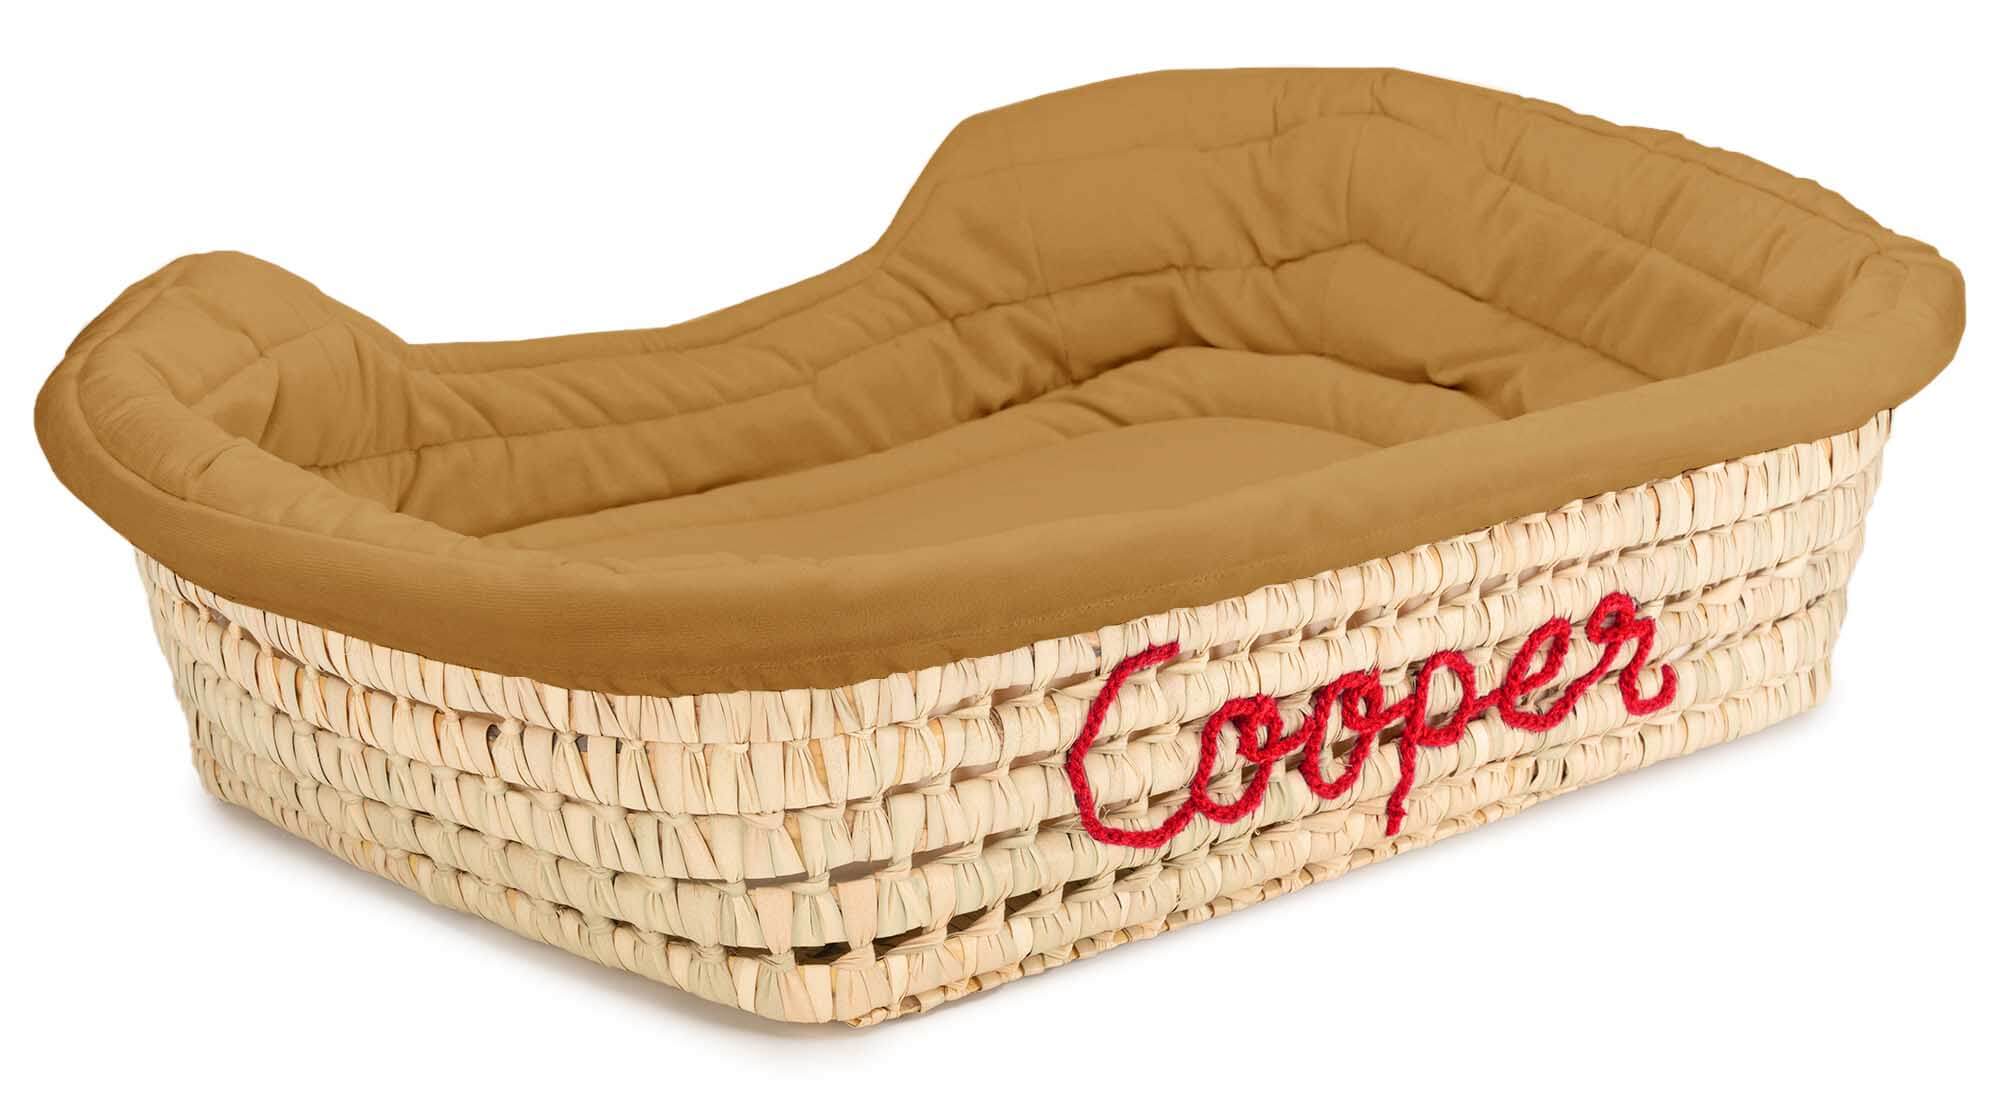 Large Dog Bed | Cute Cat Bed Personalized By Name